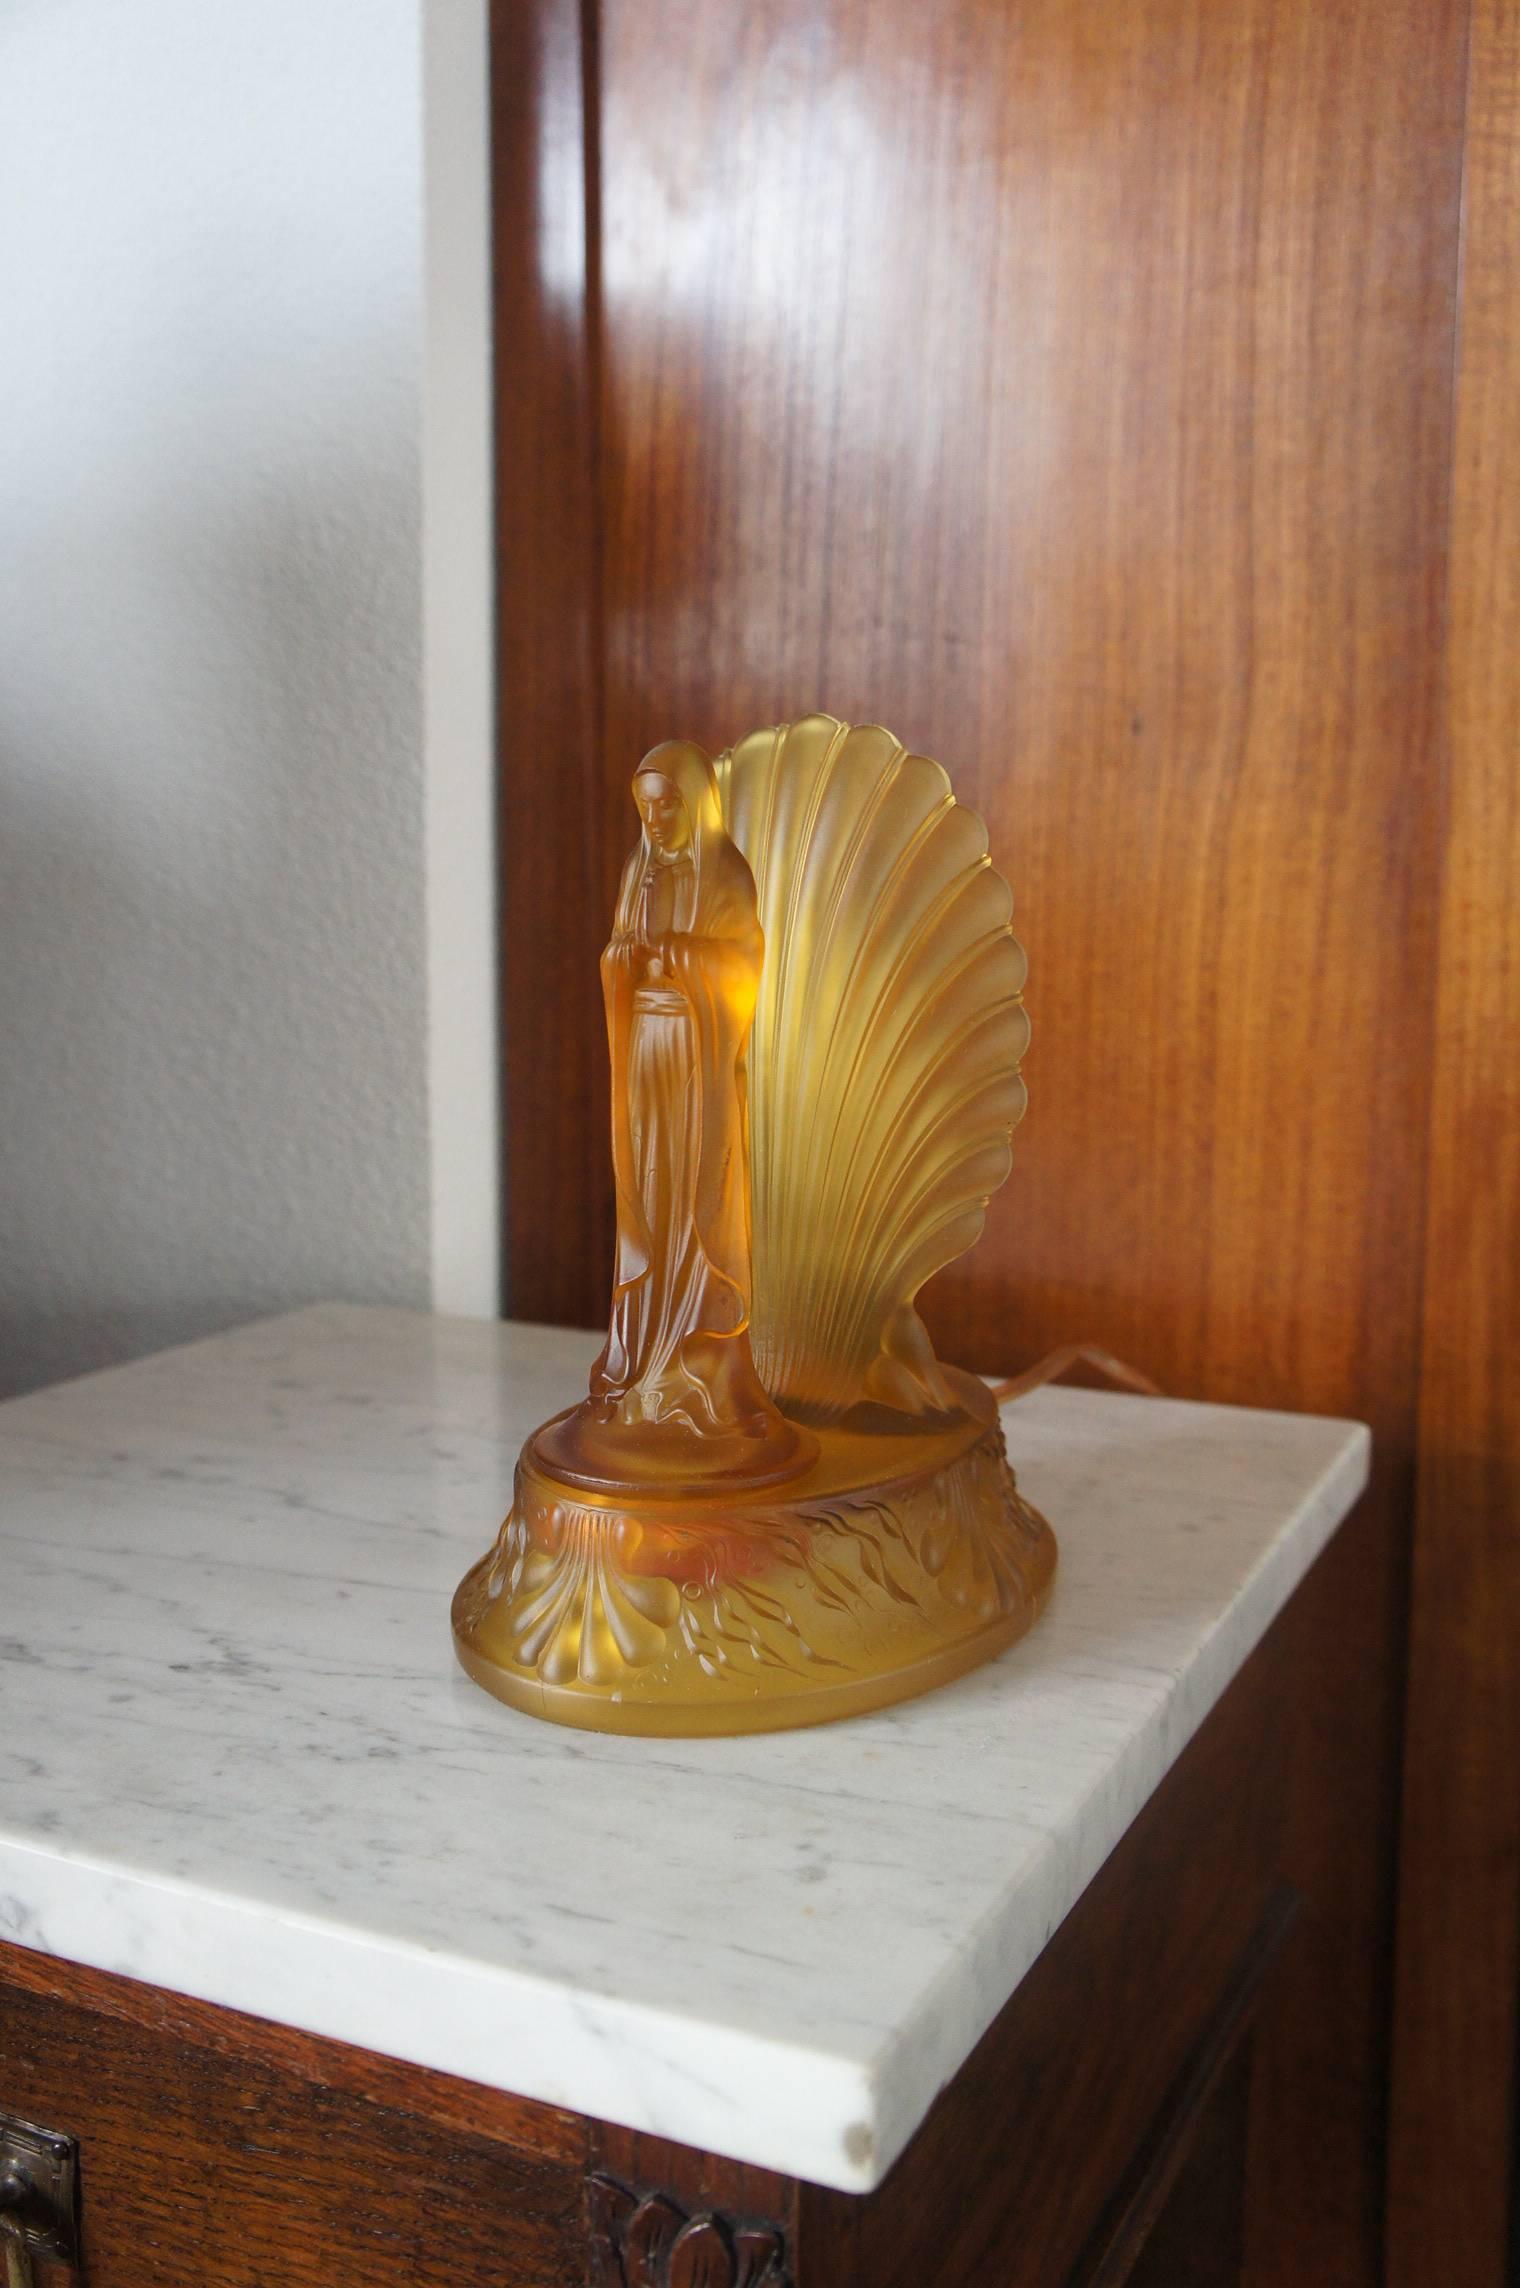 European Stunning Art Deco 'Pressed Glass' Shell Lamp with Maria / Lady Madonna in Prayer